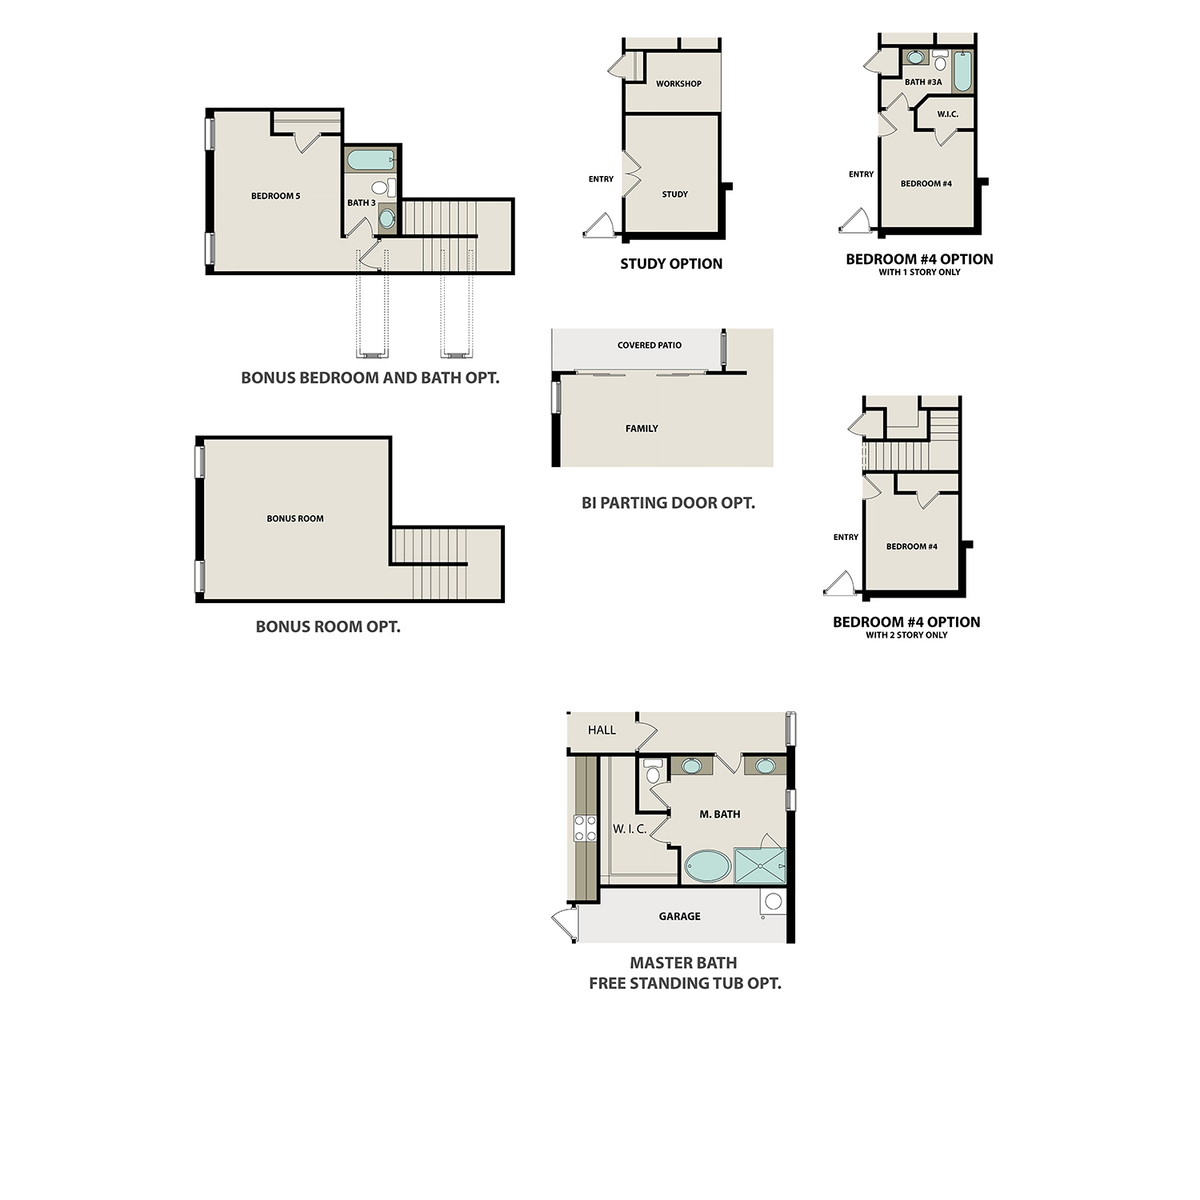 3 - The Ansley with 3-Car Garage floor plan layout for 2408 Beaver Drive in Davidson Homes' Rivers Edge community.